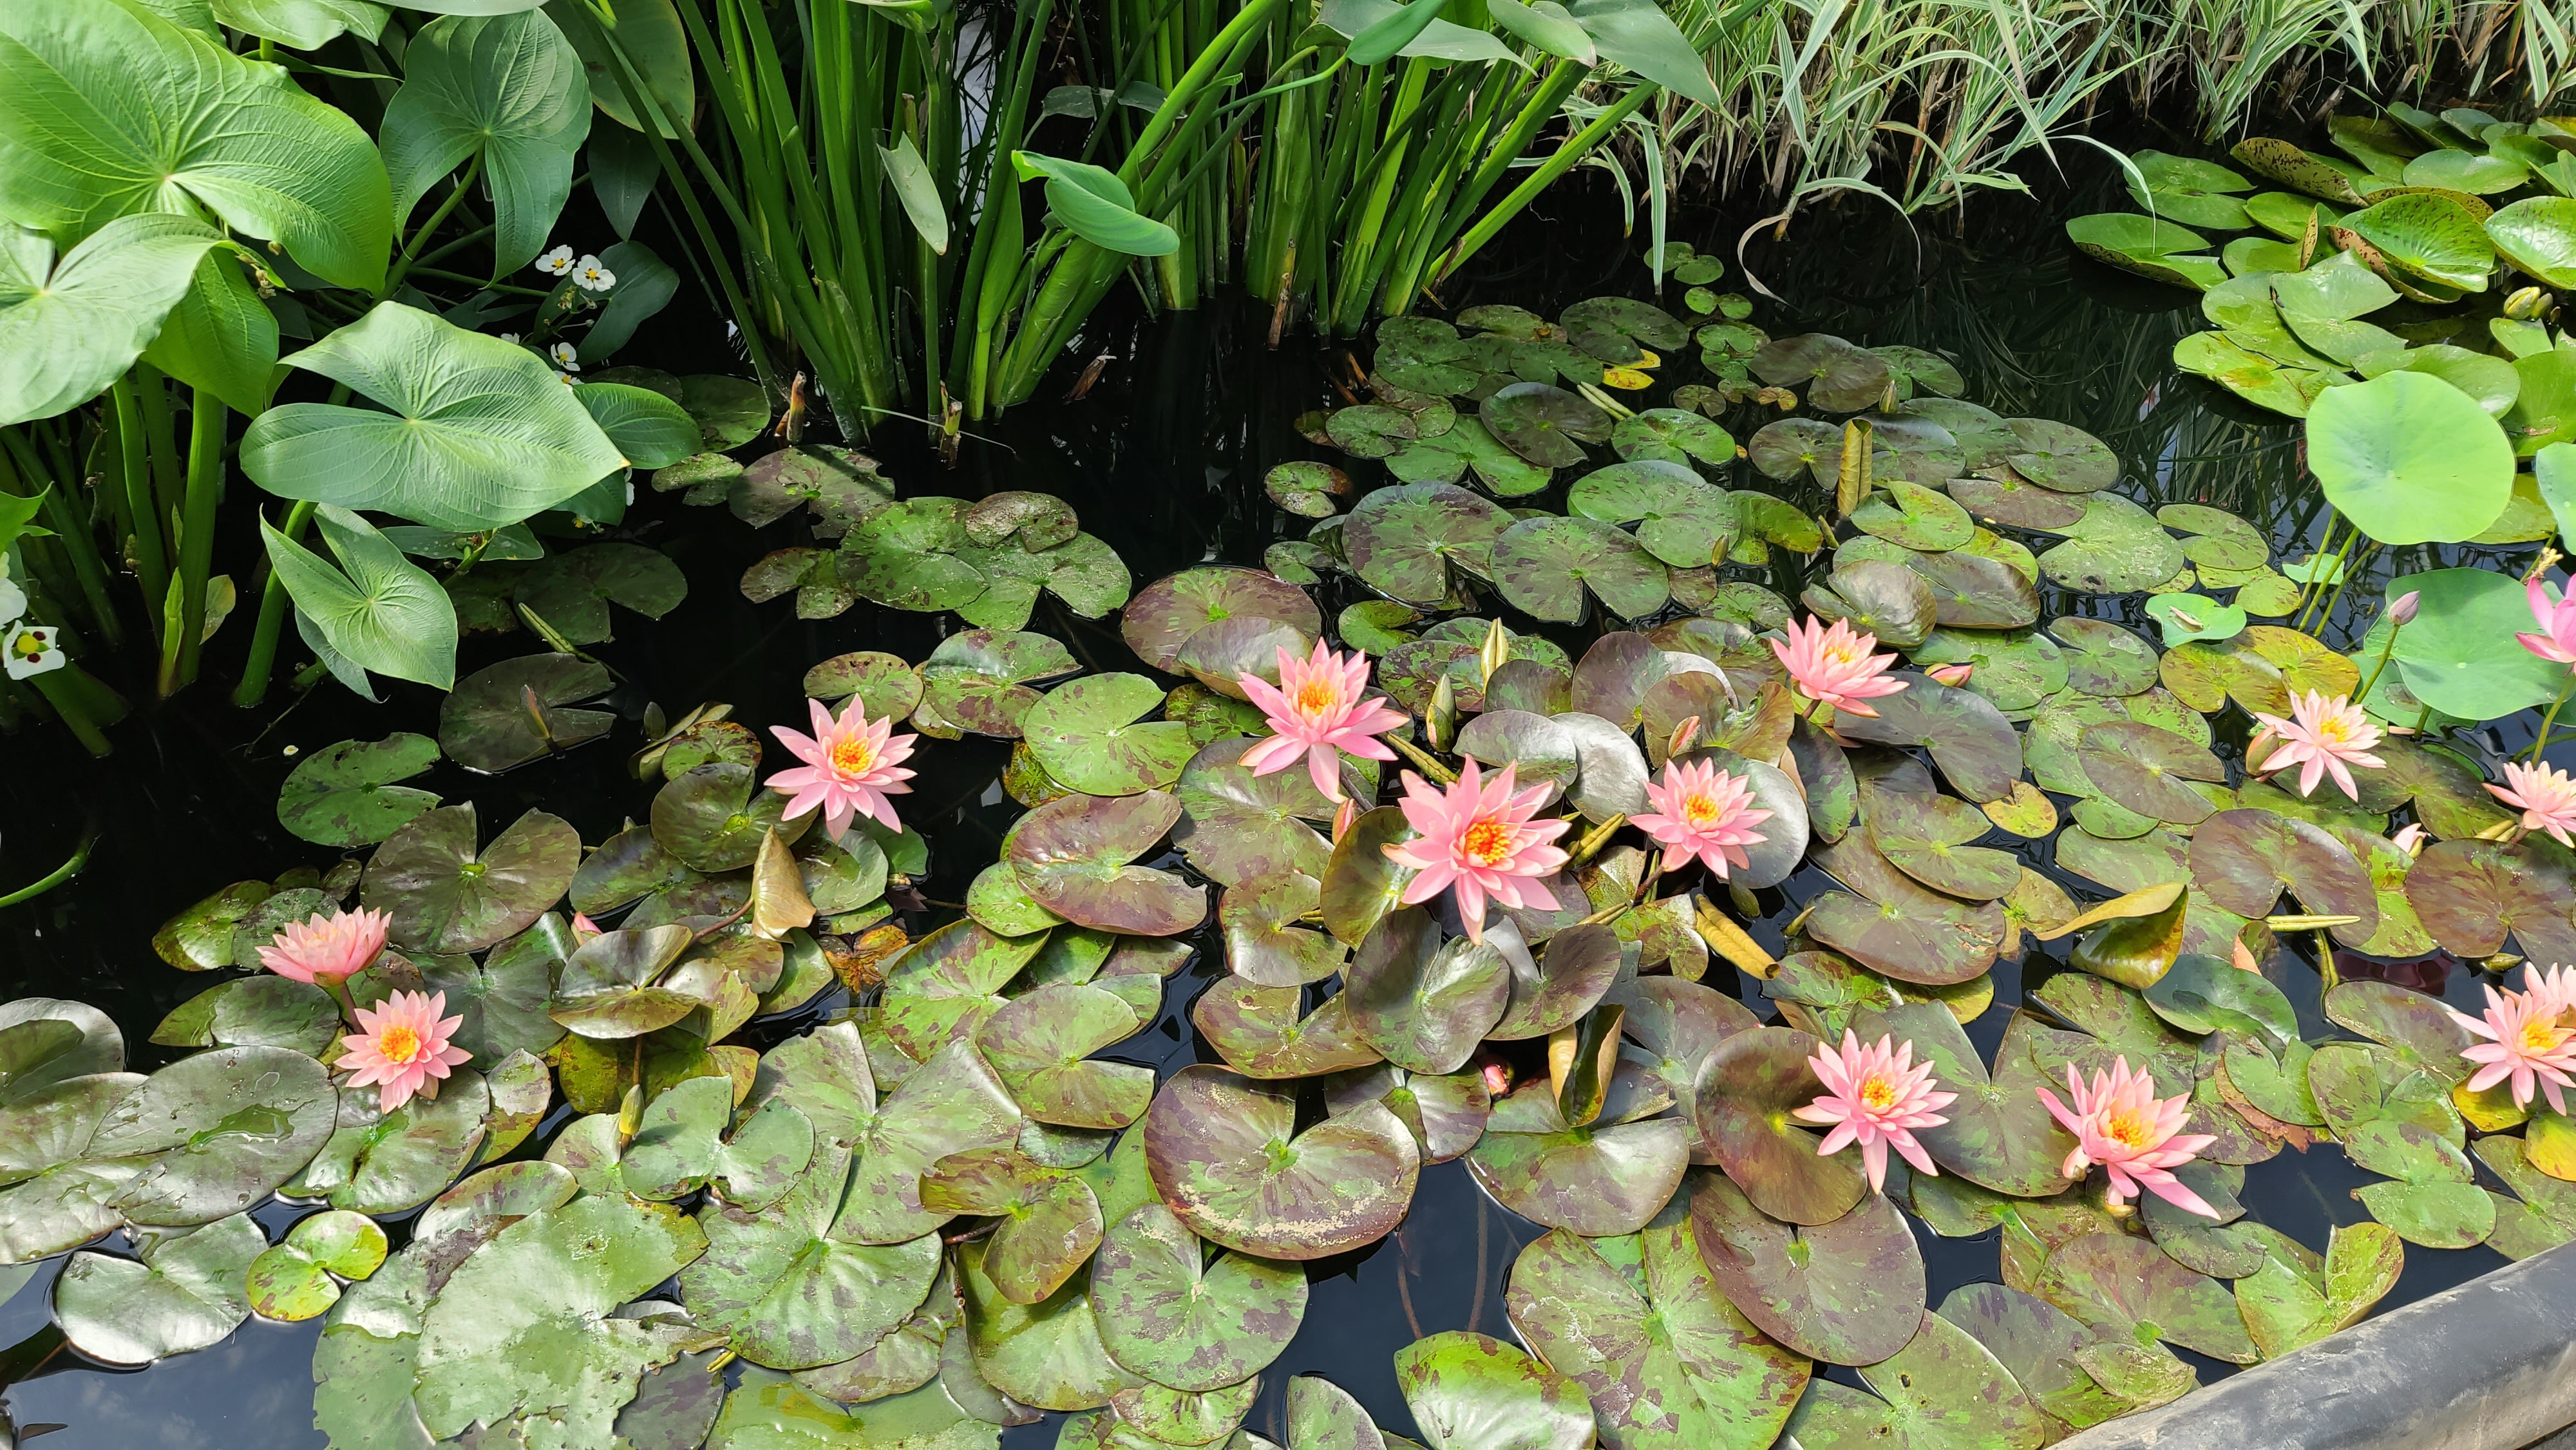 Lily Pads For Sale  Buy 1, Get 1 Free – TN Nursery